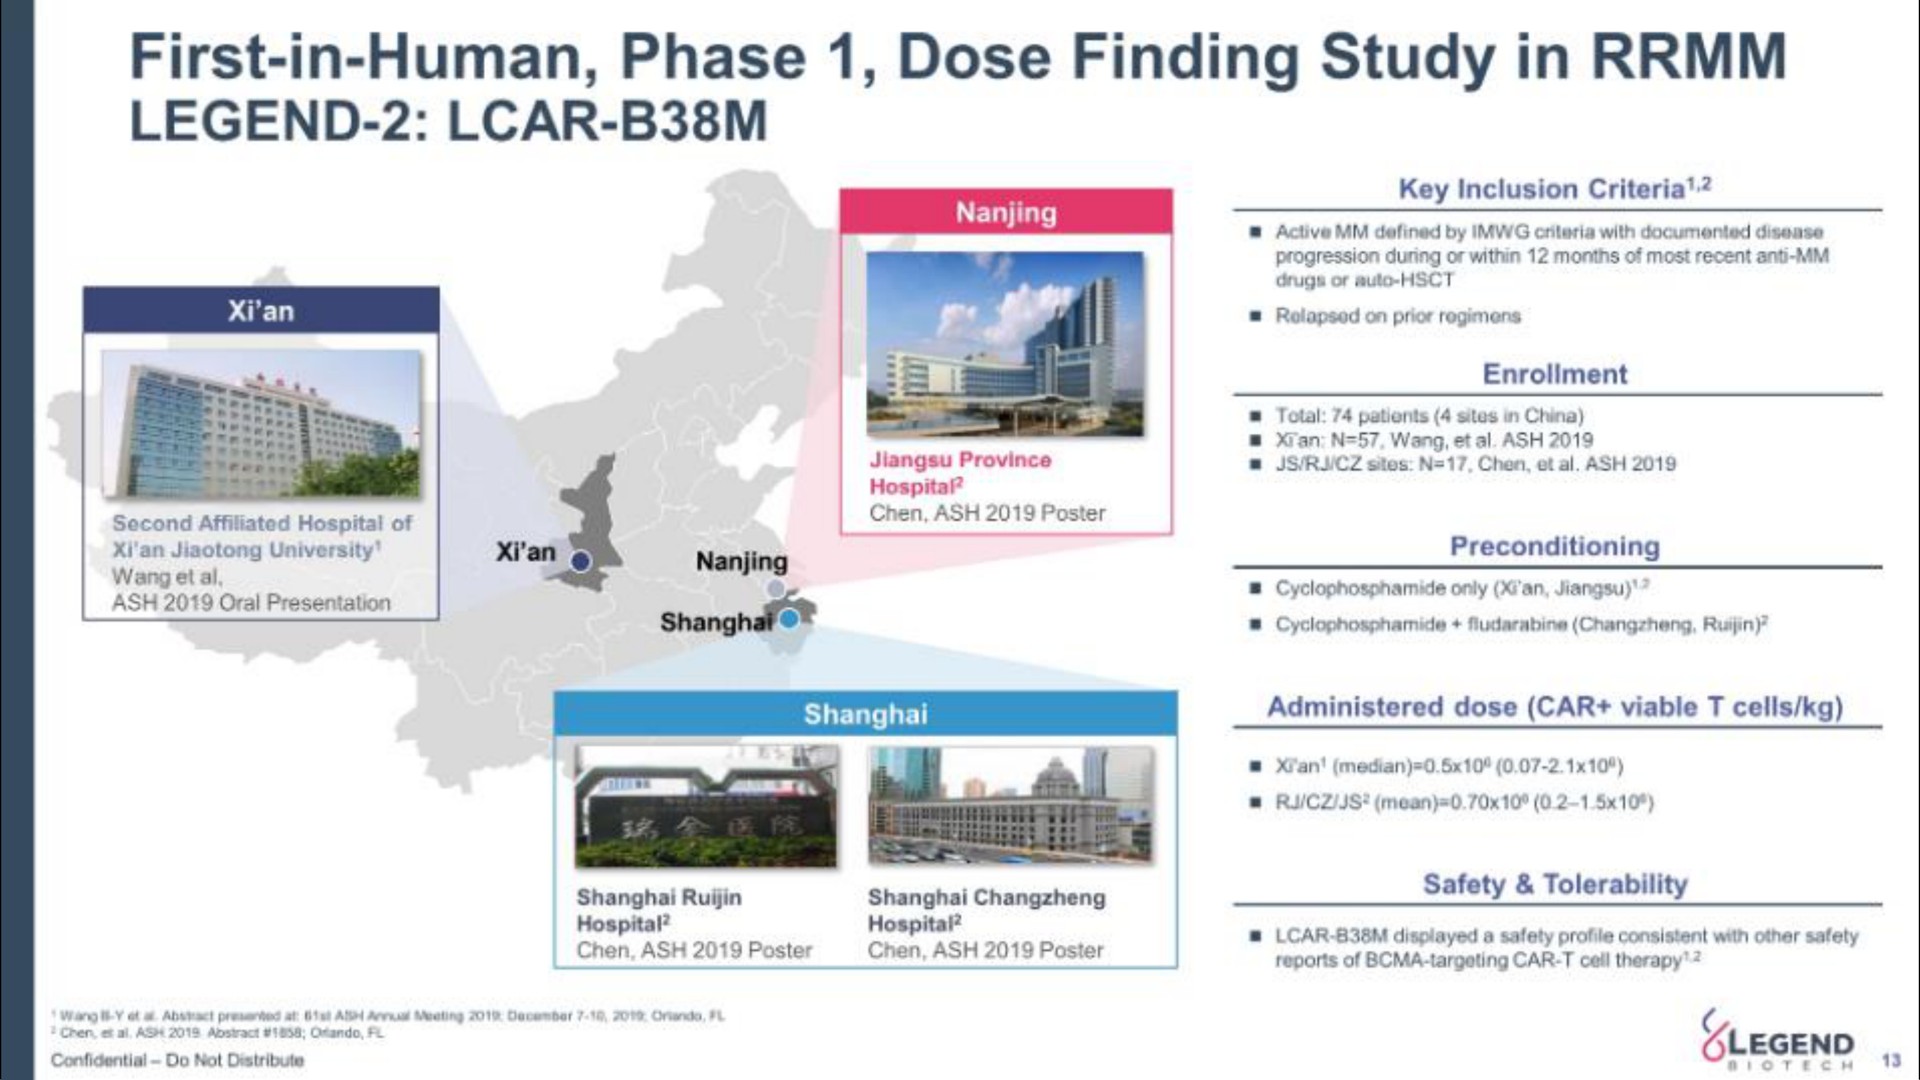 first in human phase dose finding study in legend | Legend Biotech